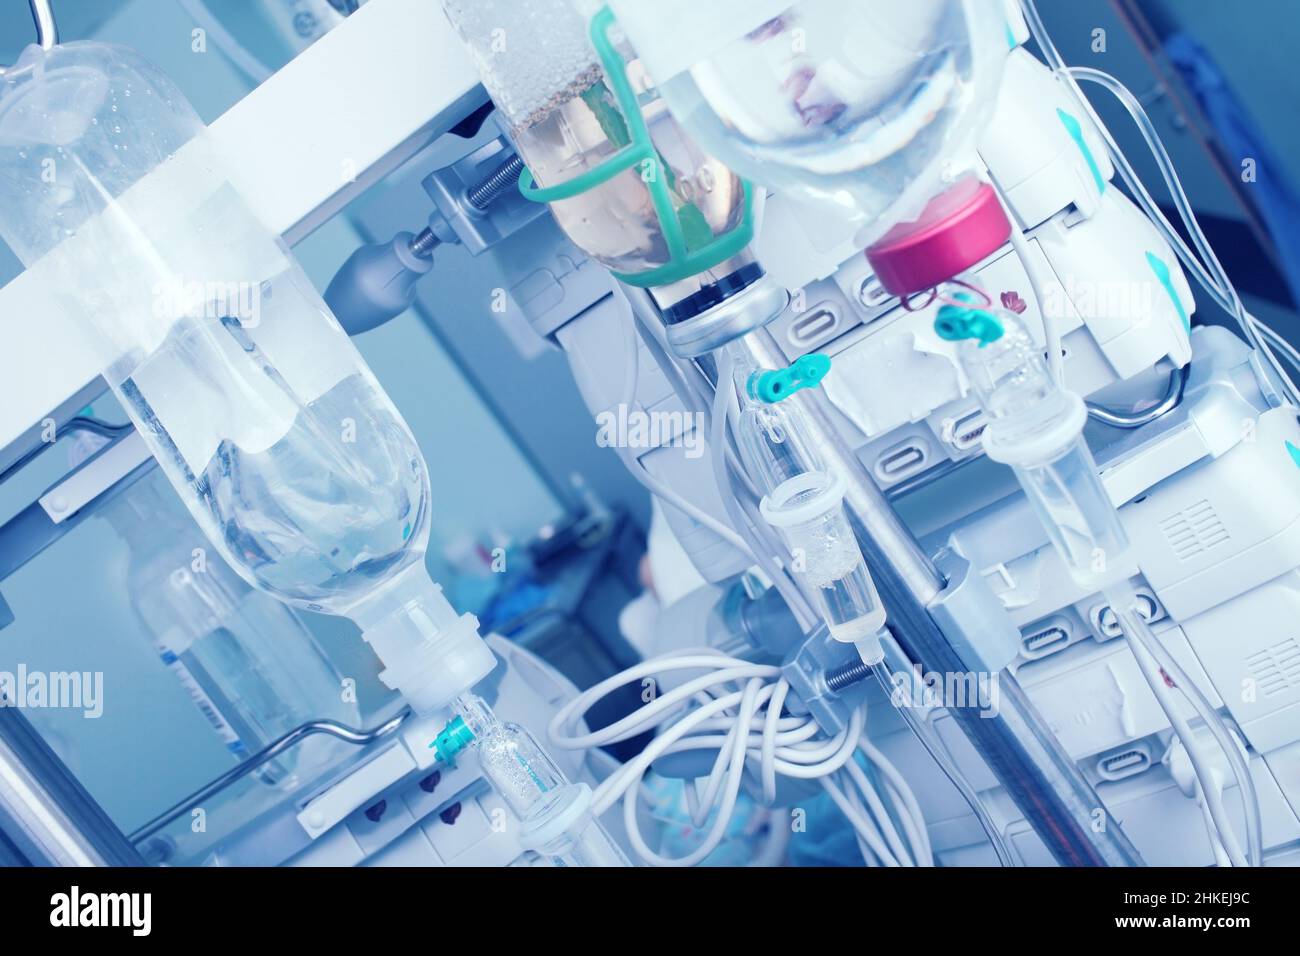 Intravenous drip with saline bottles on the background of digital equipment. Stock Photo